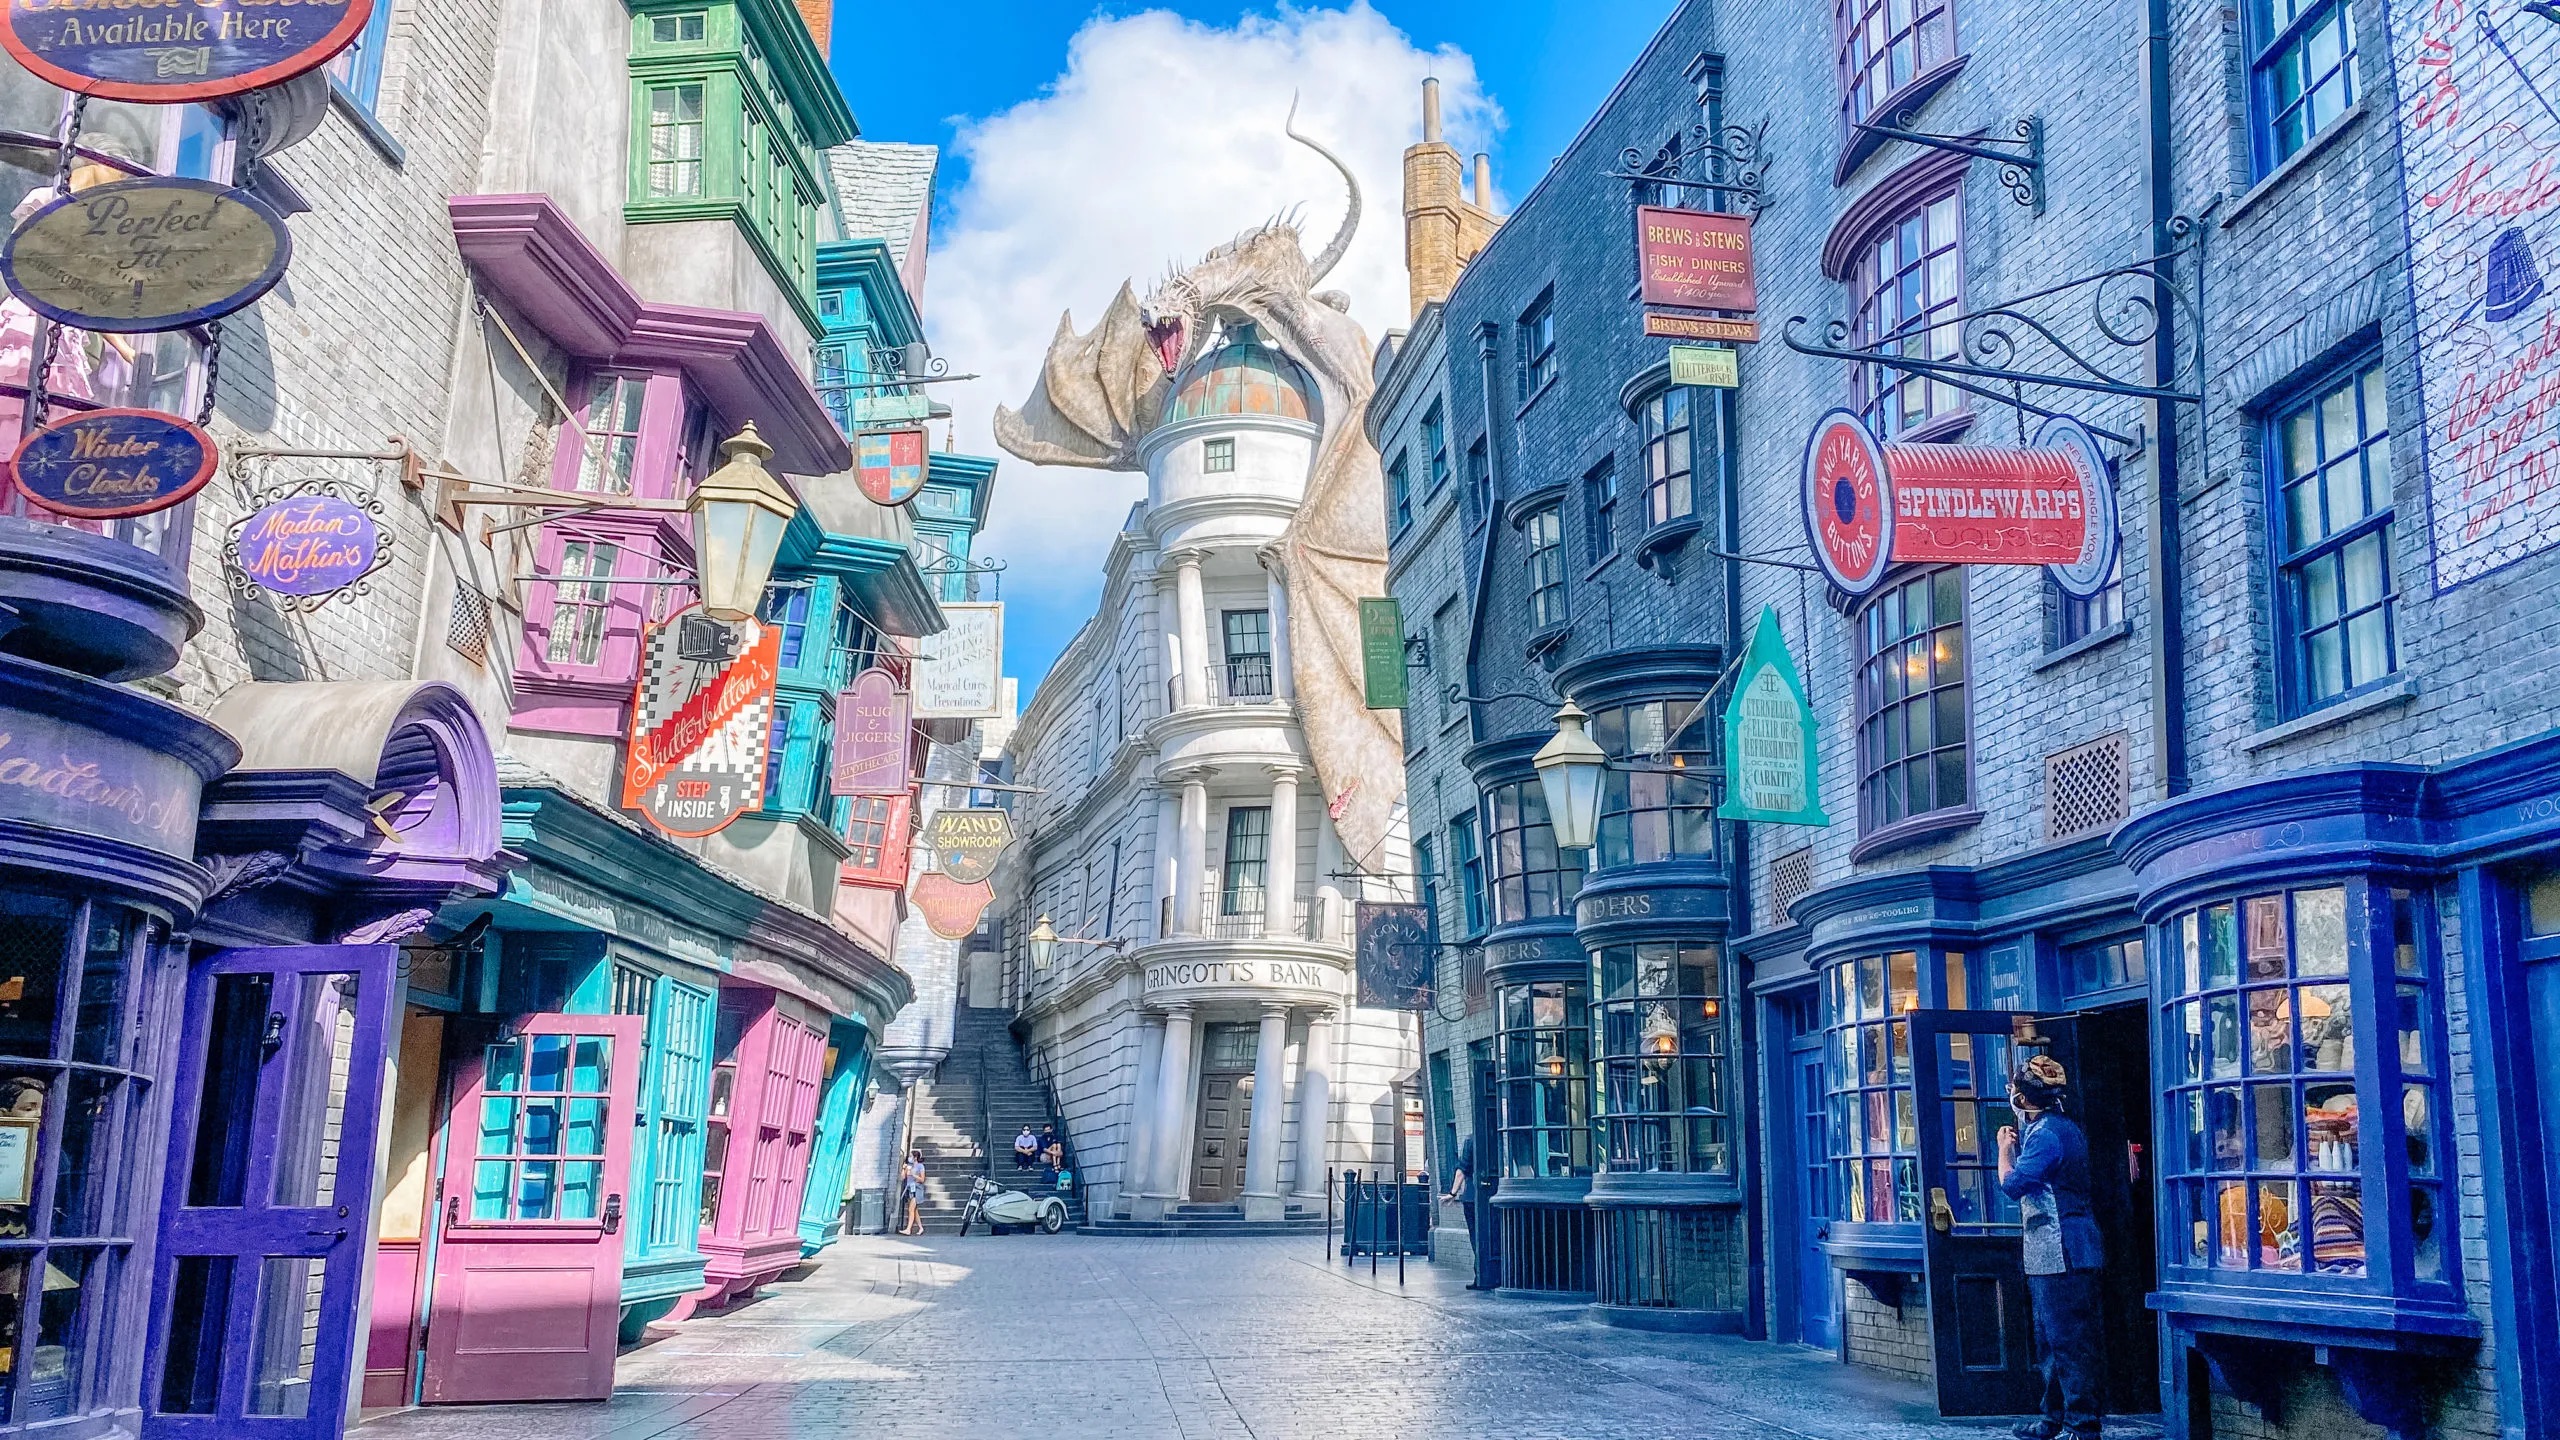 Harry Potter Universe on X Diagon Alley at the Wizarding World of Harry  Potter in Orlando Florida  httpstcoO60YQsJ9q6  X